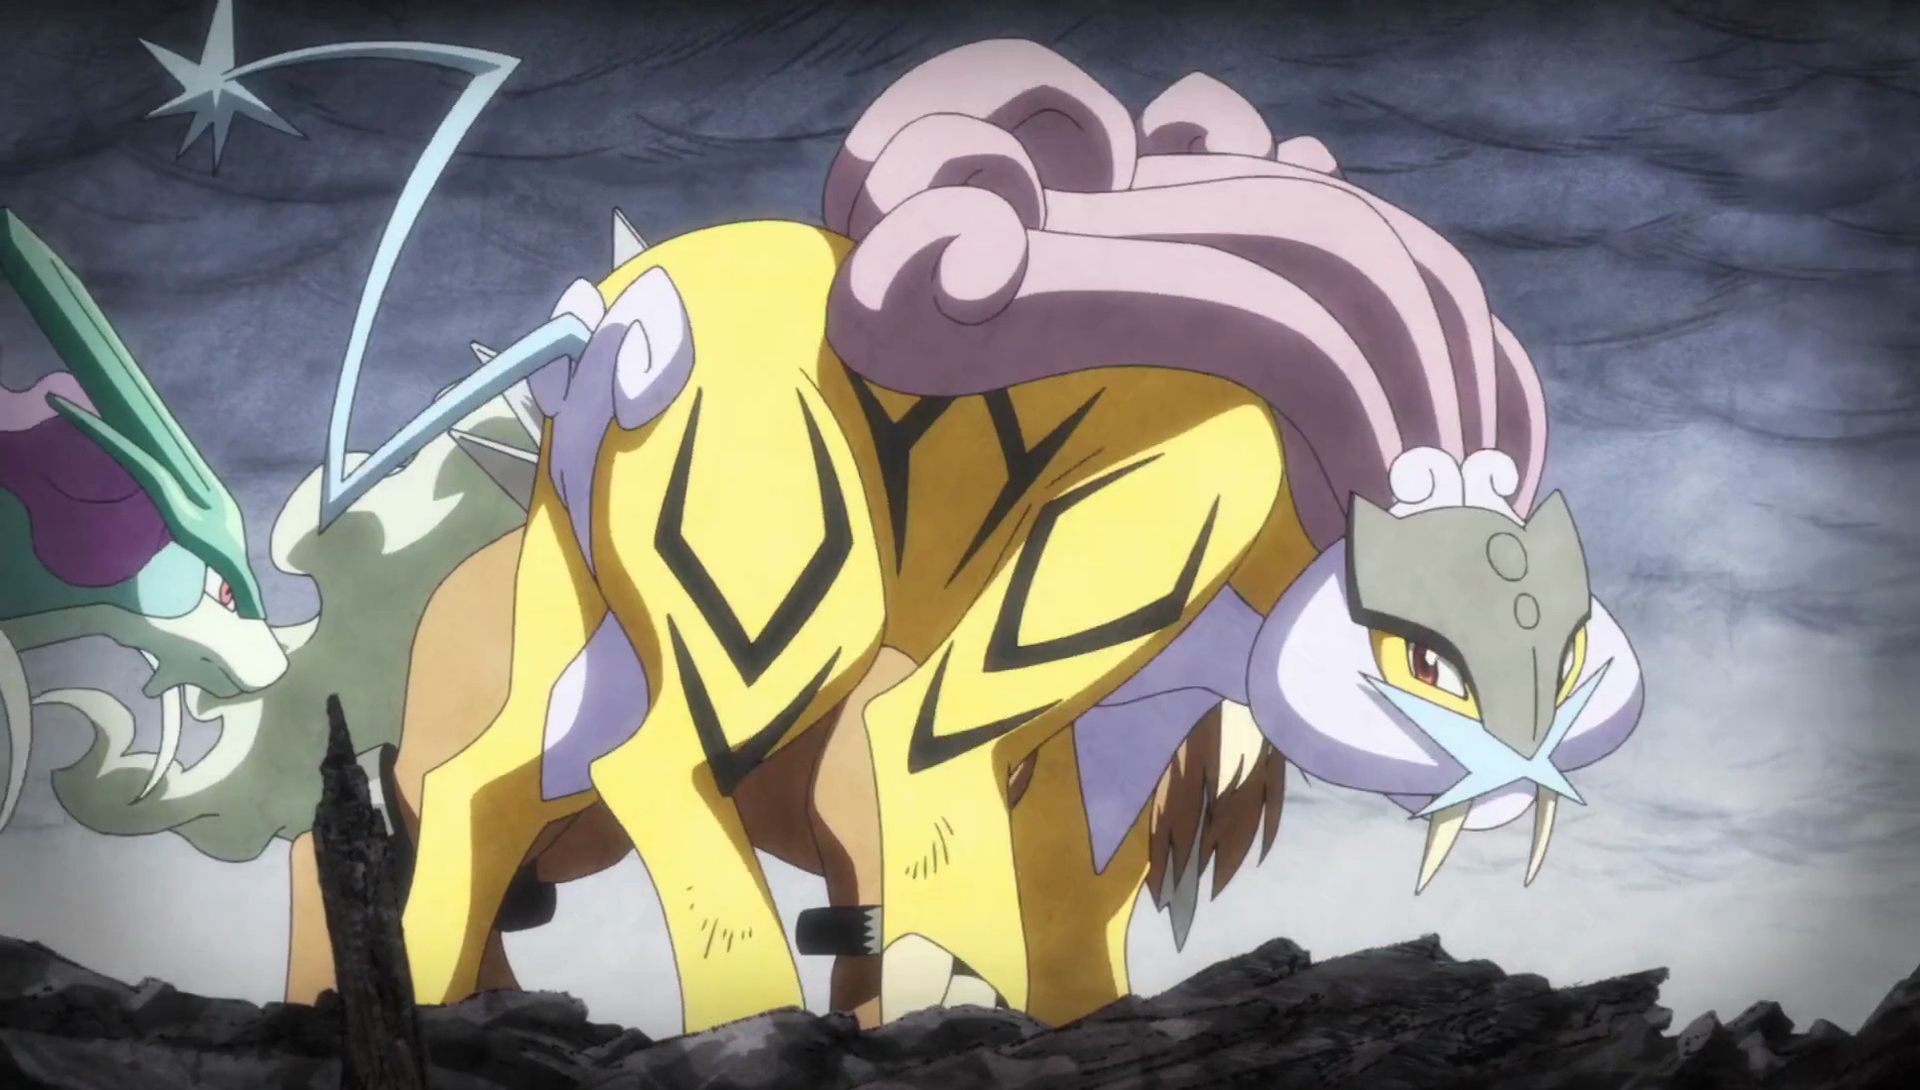 Pokemon - Raikou(with cuts and as a whole)